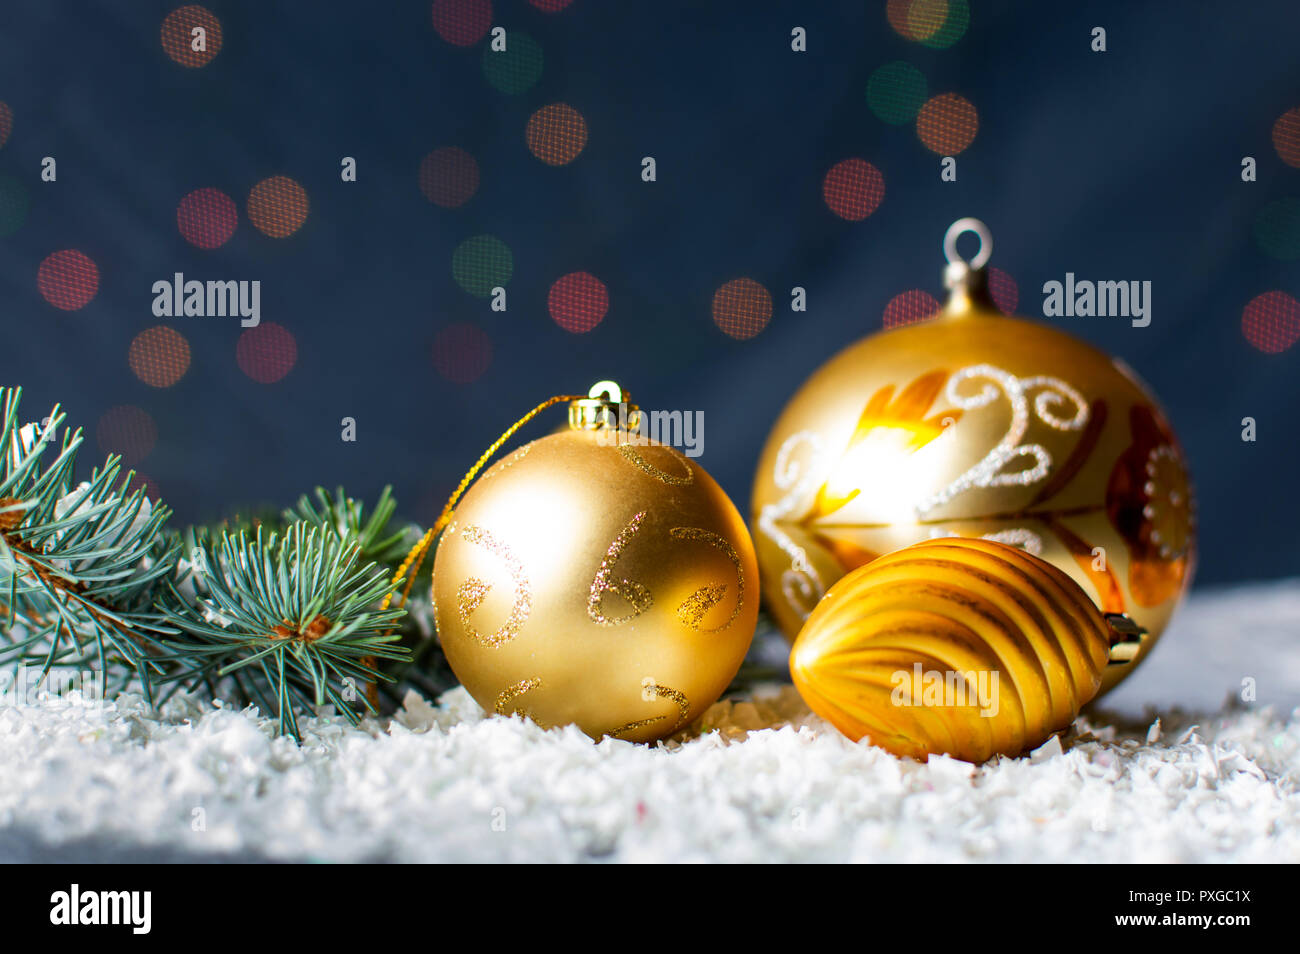 Golden Christmas ornaments and fir branch with festive background Stock Photo